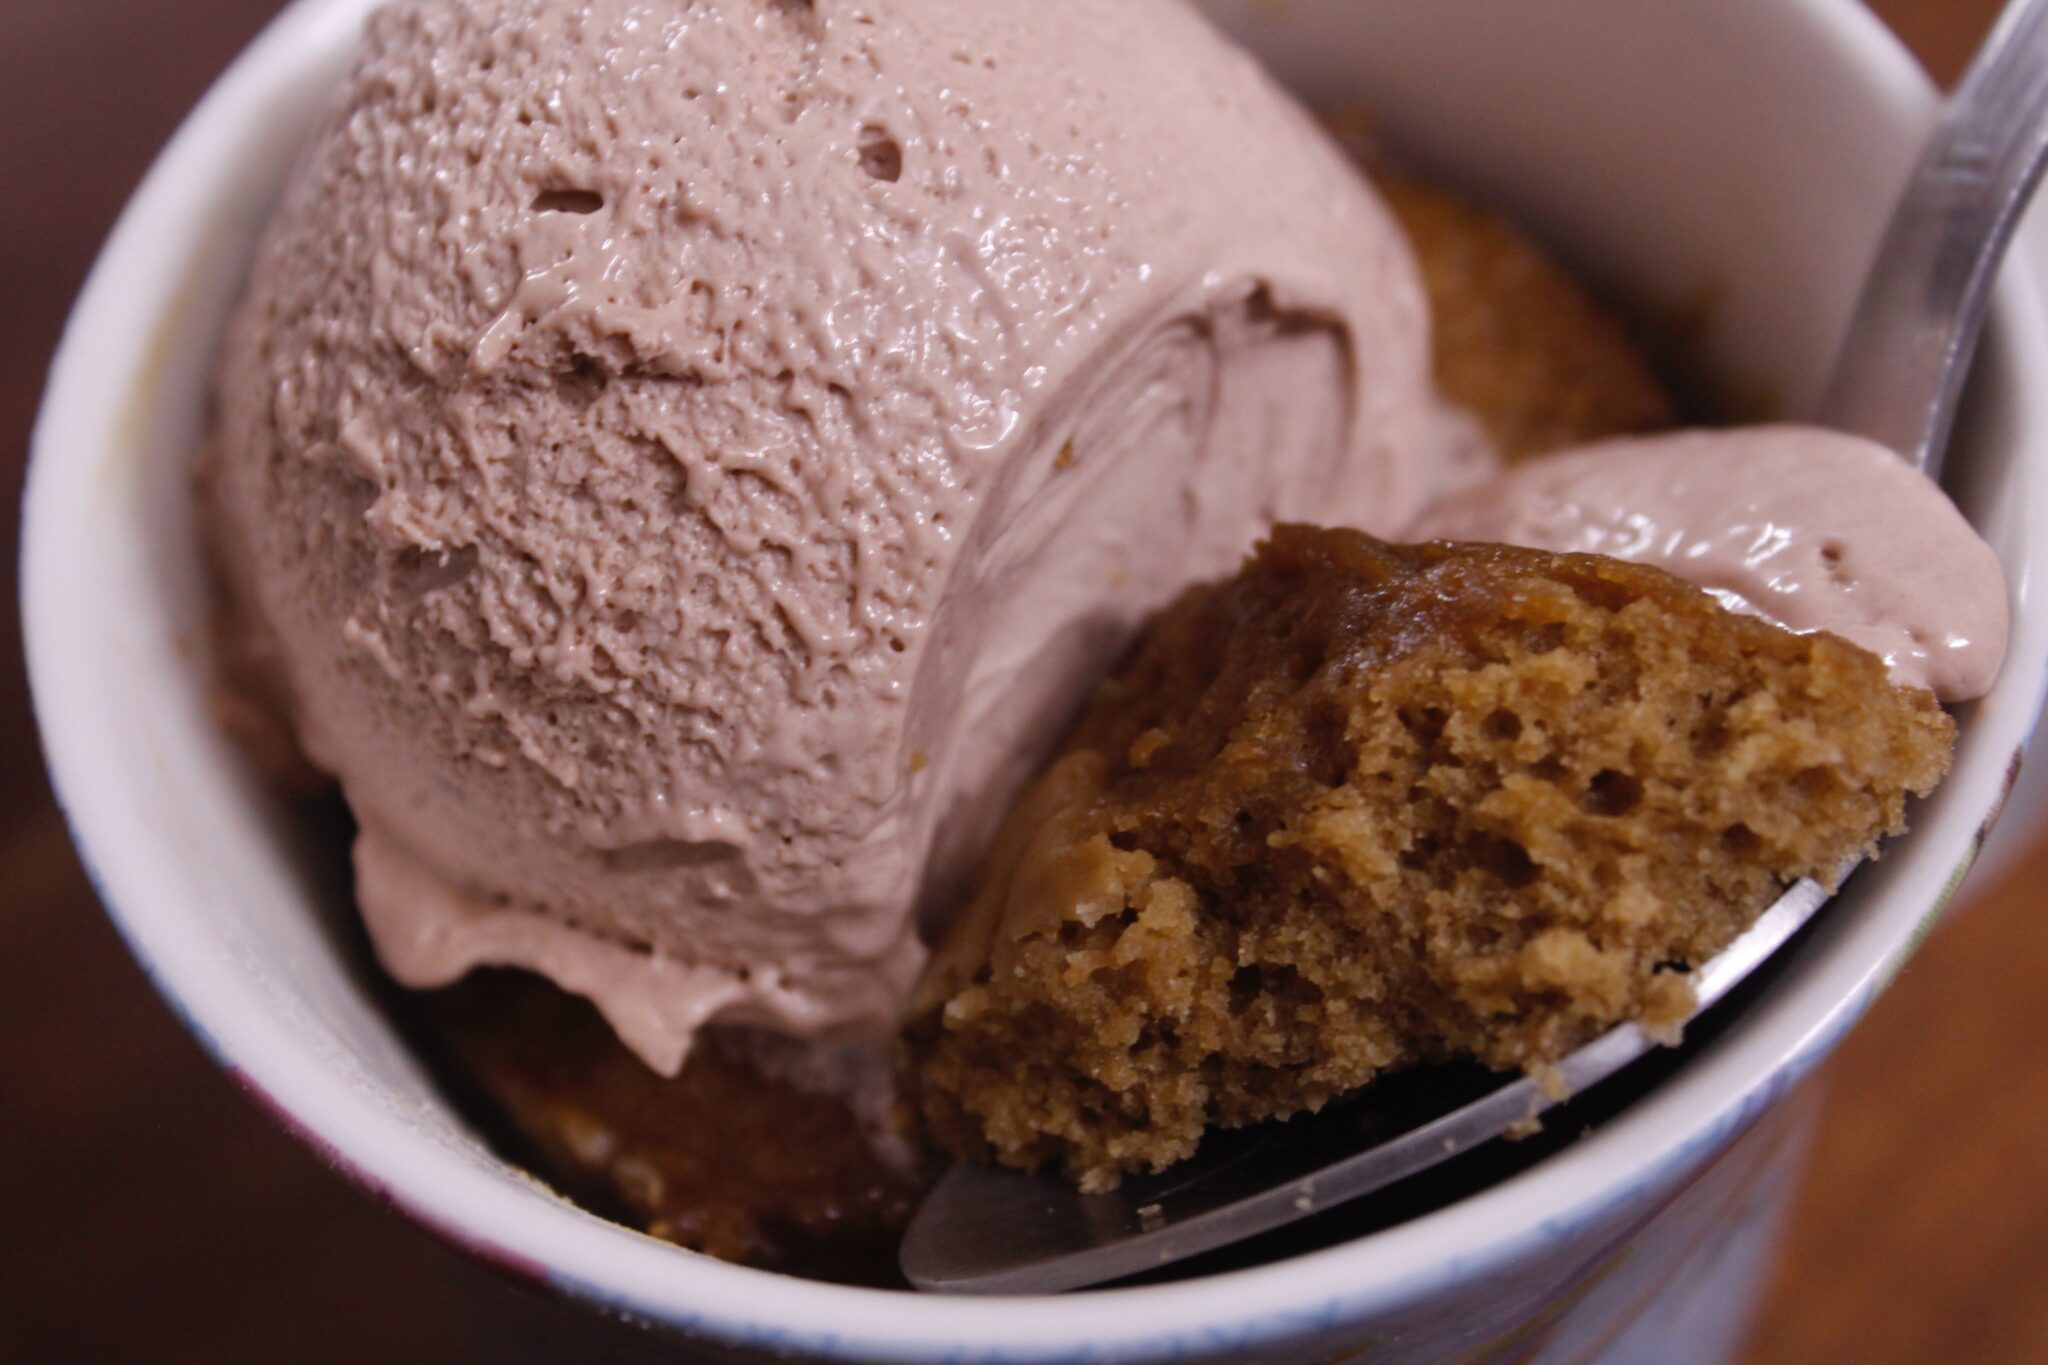 a white bowl containing a scoop of chocolate ice cream and a scoop of strawberry ice cream.